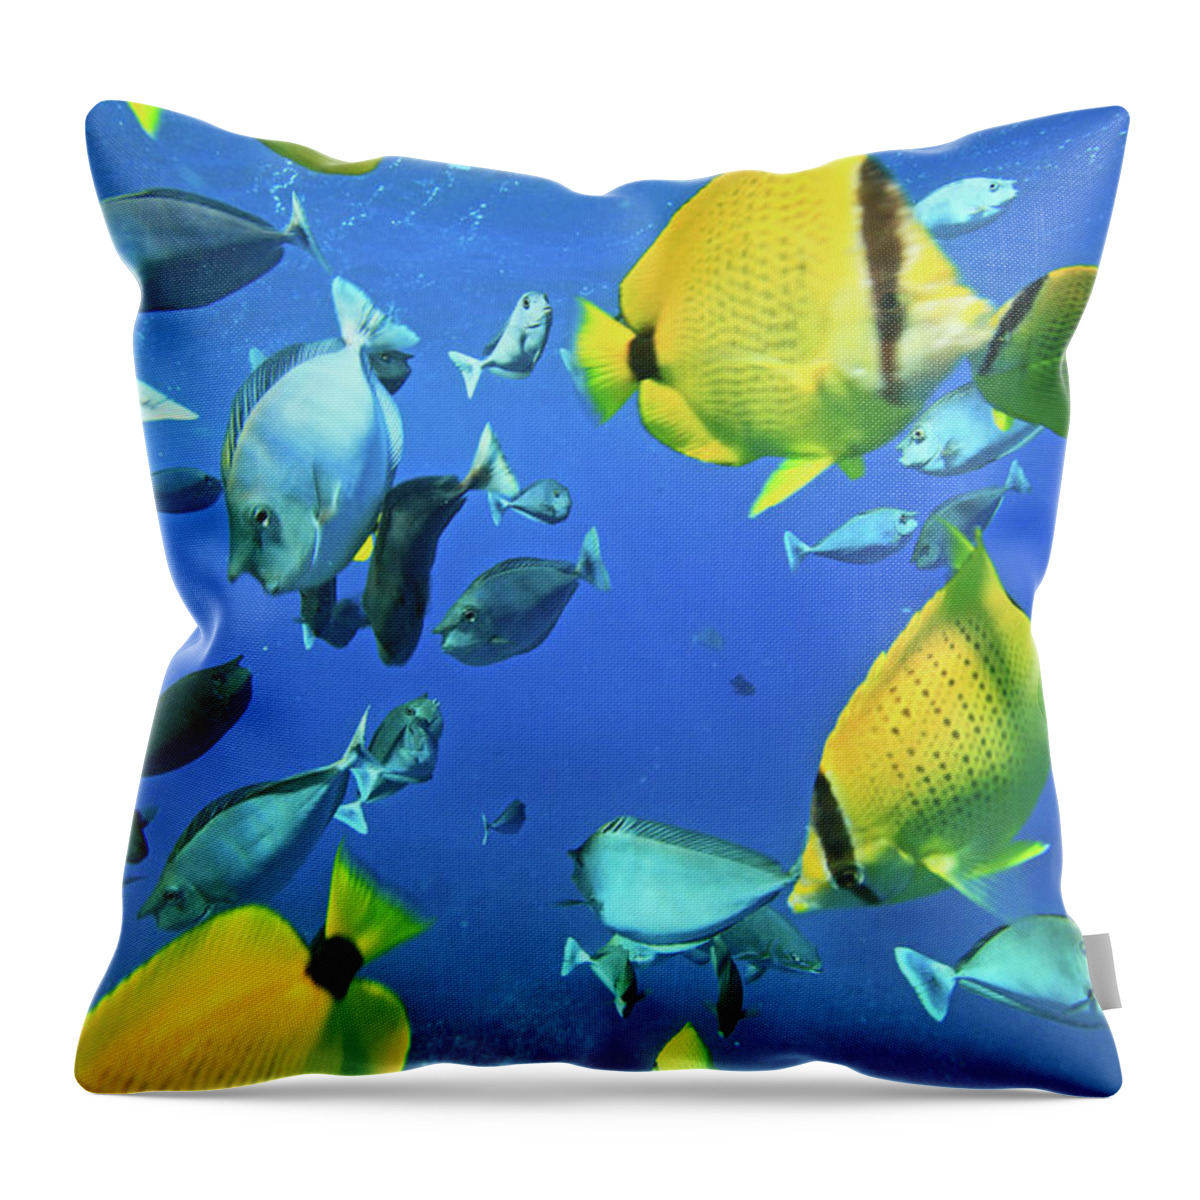 Underwater Throw Pillow featuring the photograph Unicorn Fish by Chris Stankis